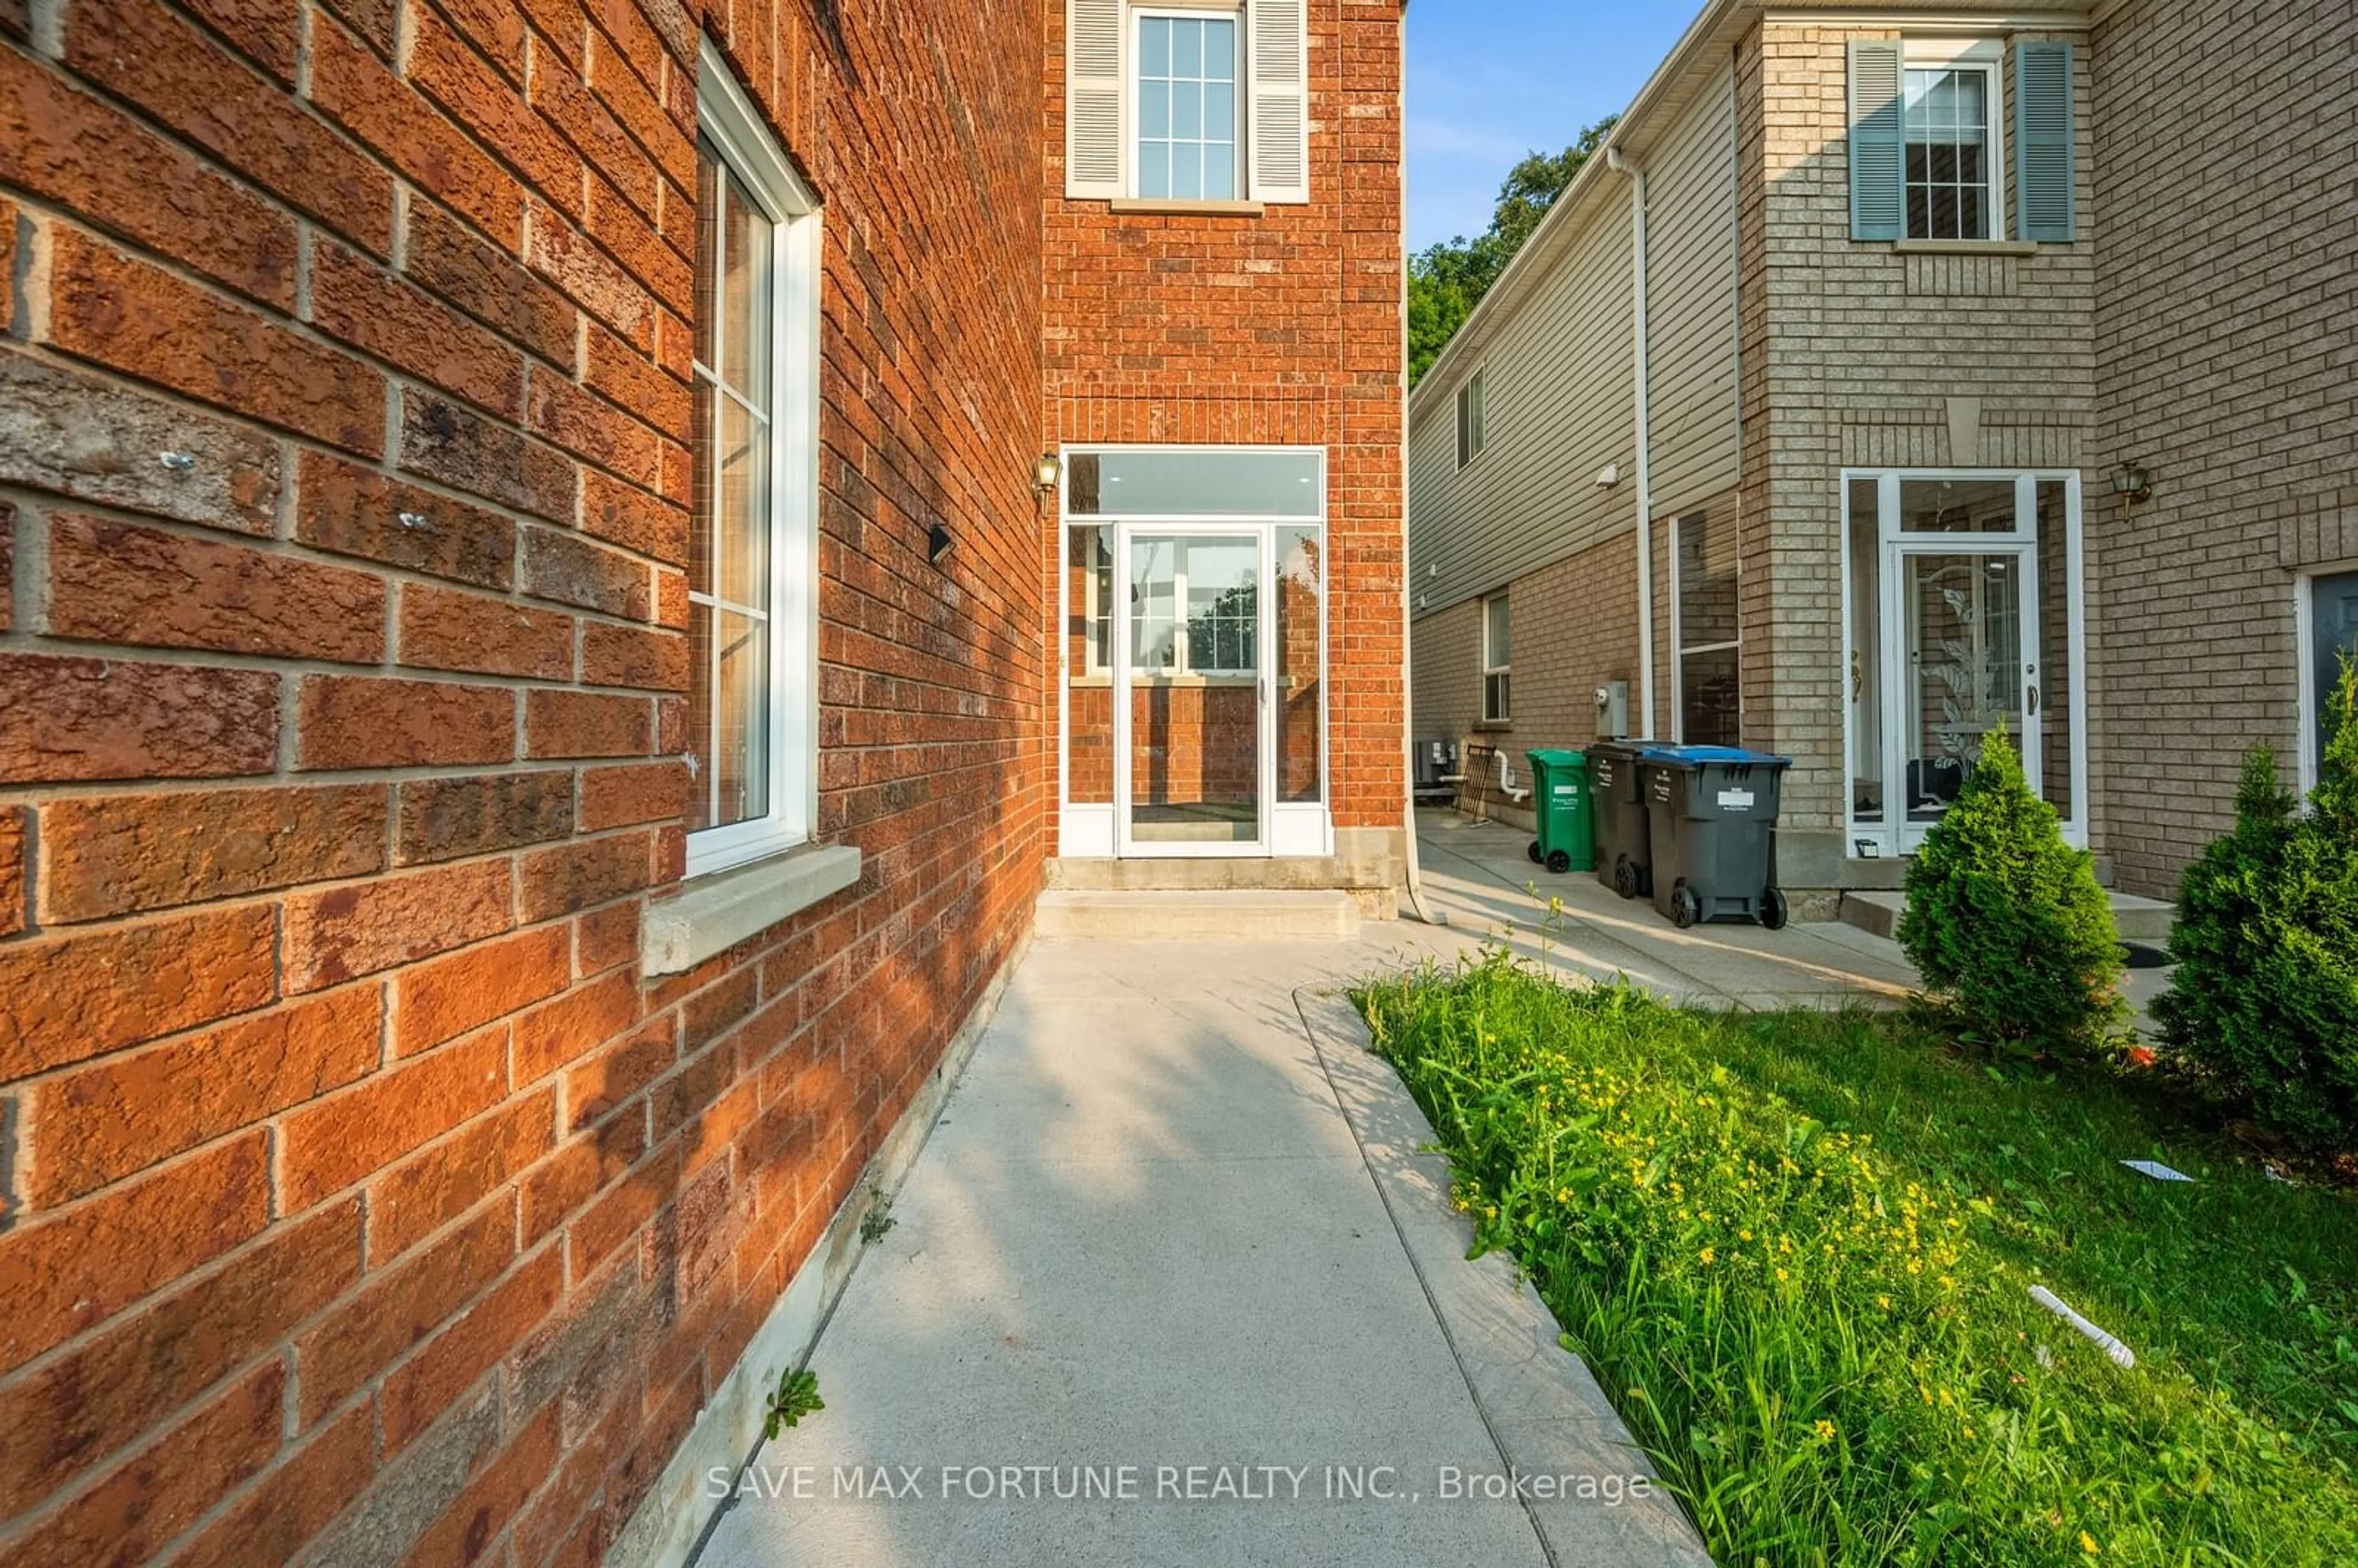 Home with brick exterior material for 80 Bunchberry Way, Brampton Ontario L6R 2E8